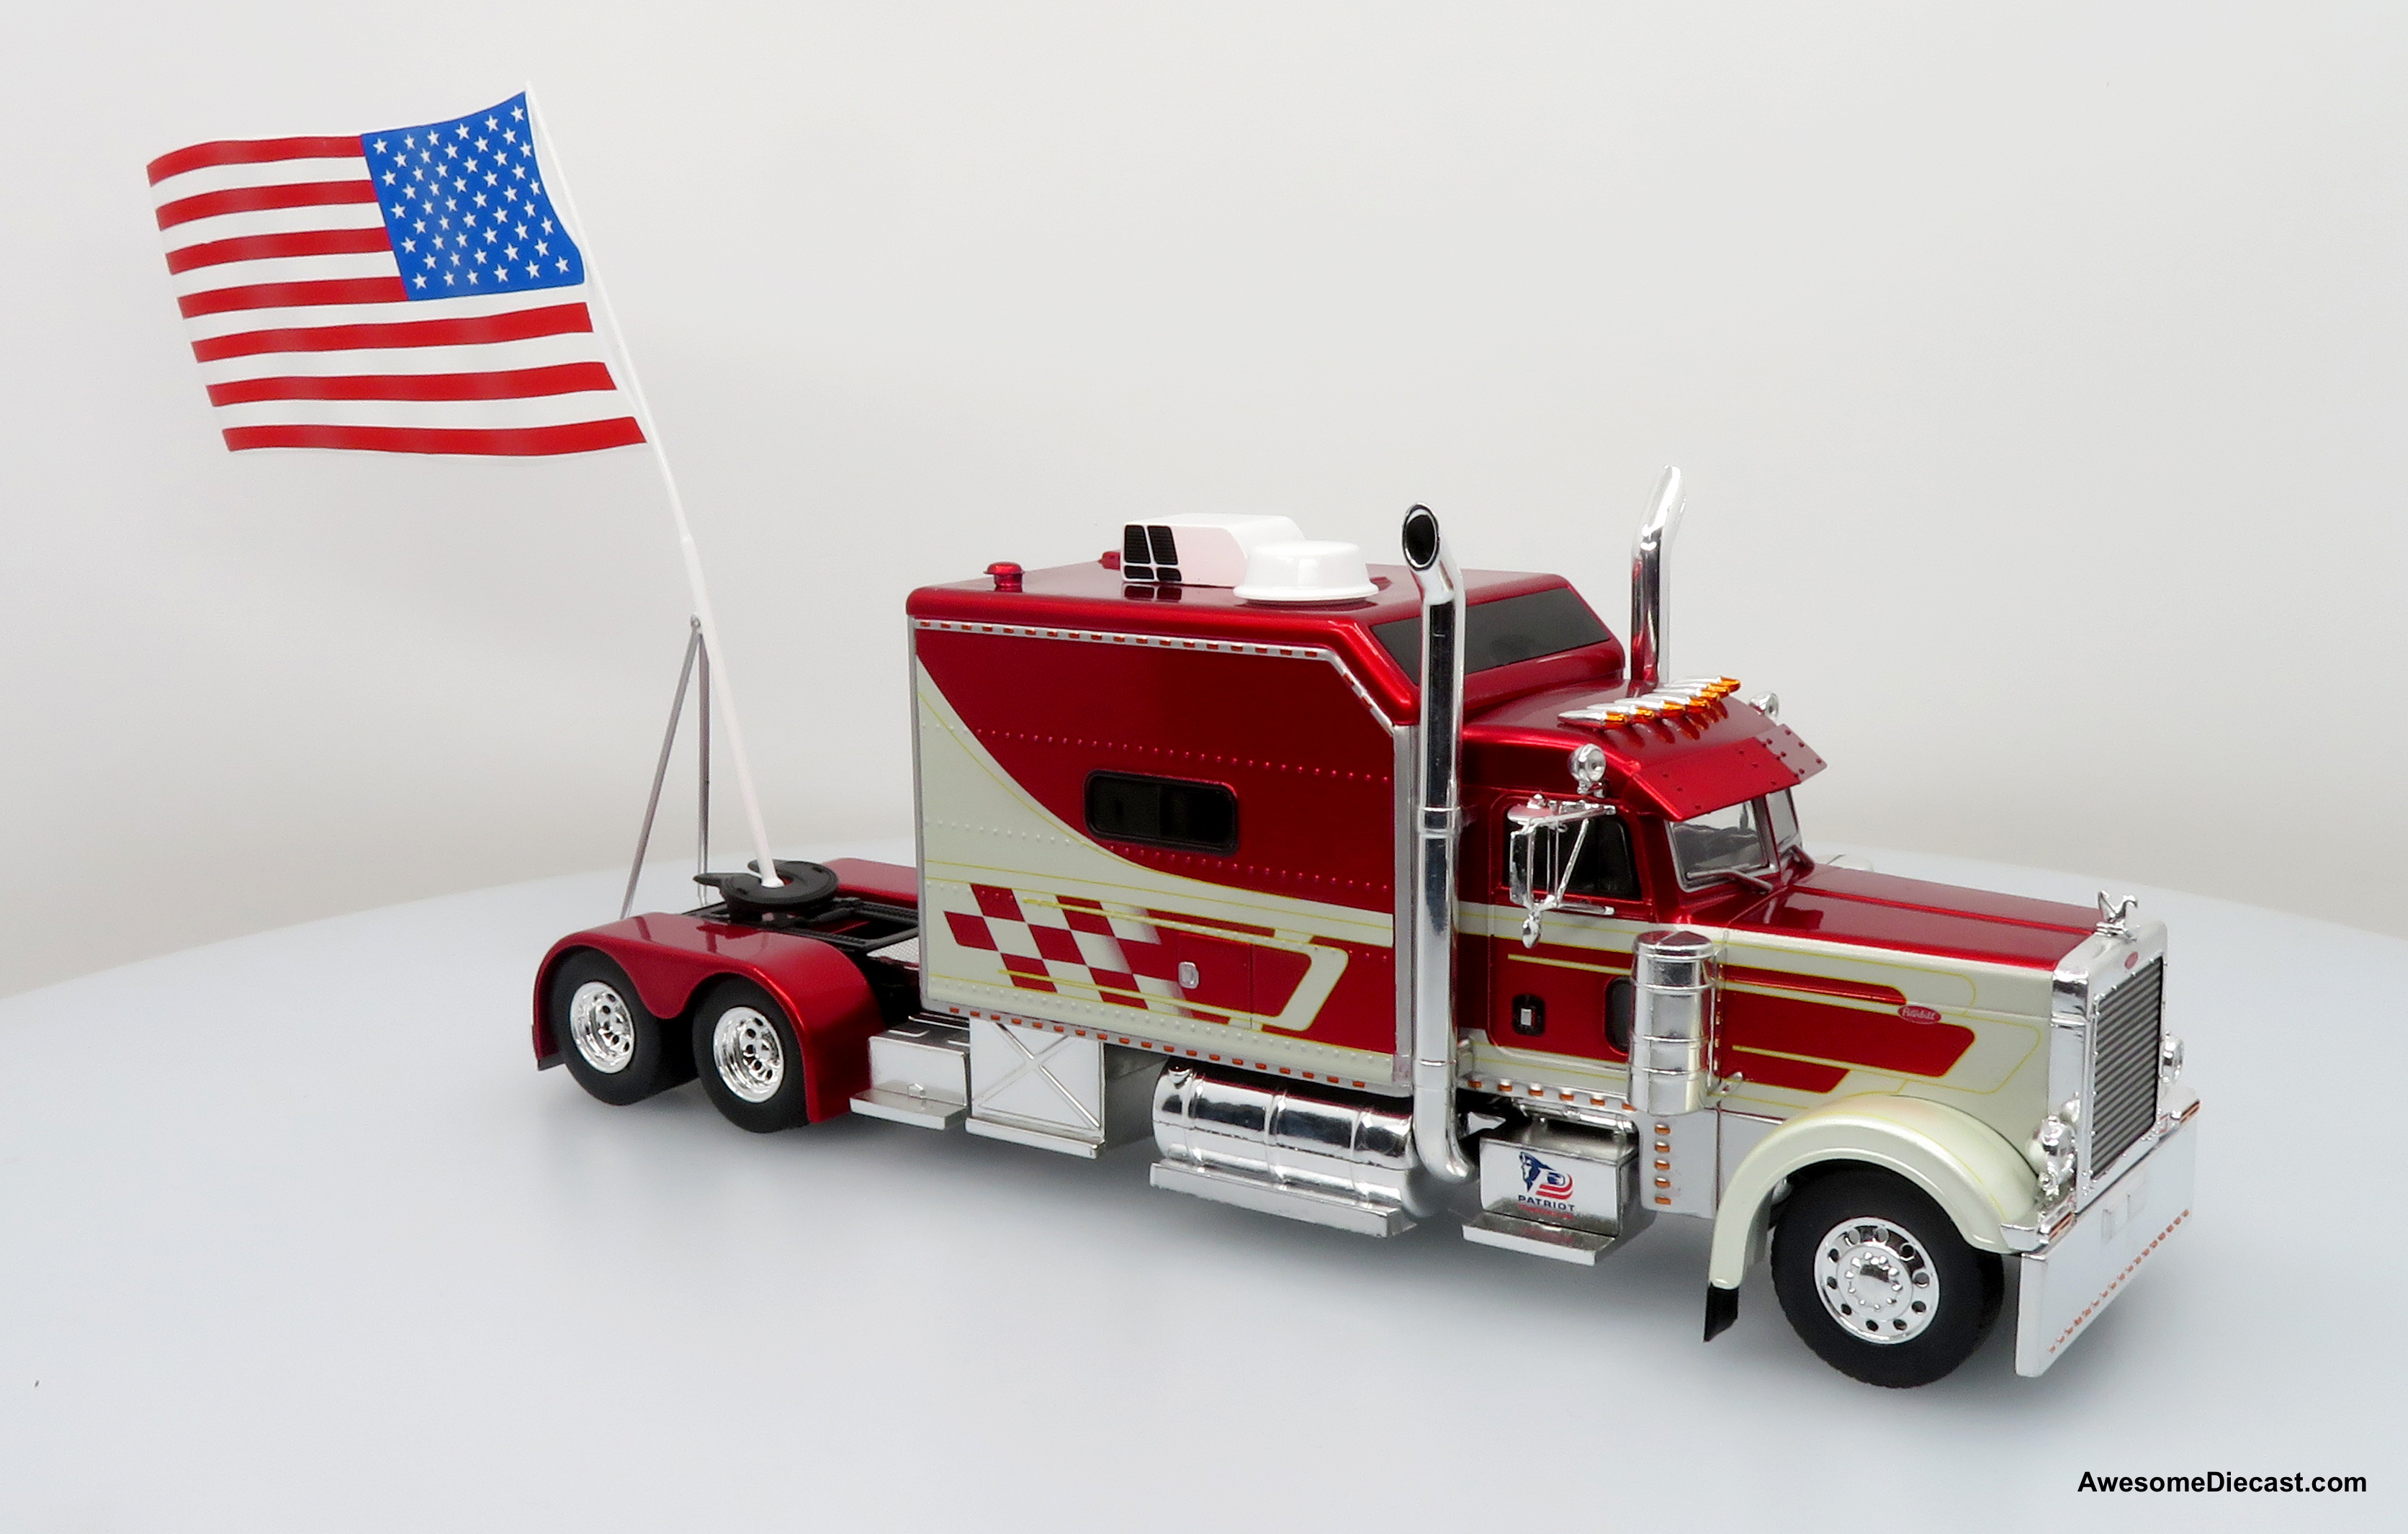 Iconic Replicas 1:43 1997 Peterbilt 379 O/O Tractor | Proud To Wave The Flag: 1 of 504